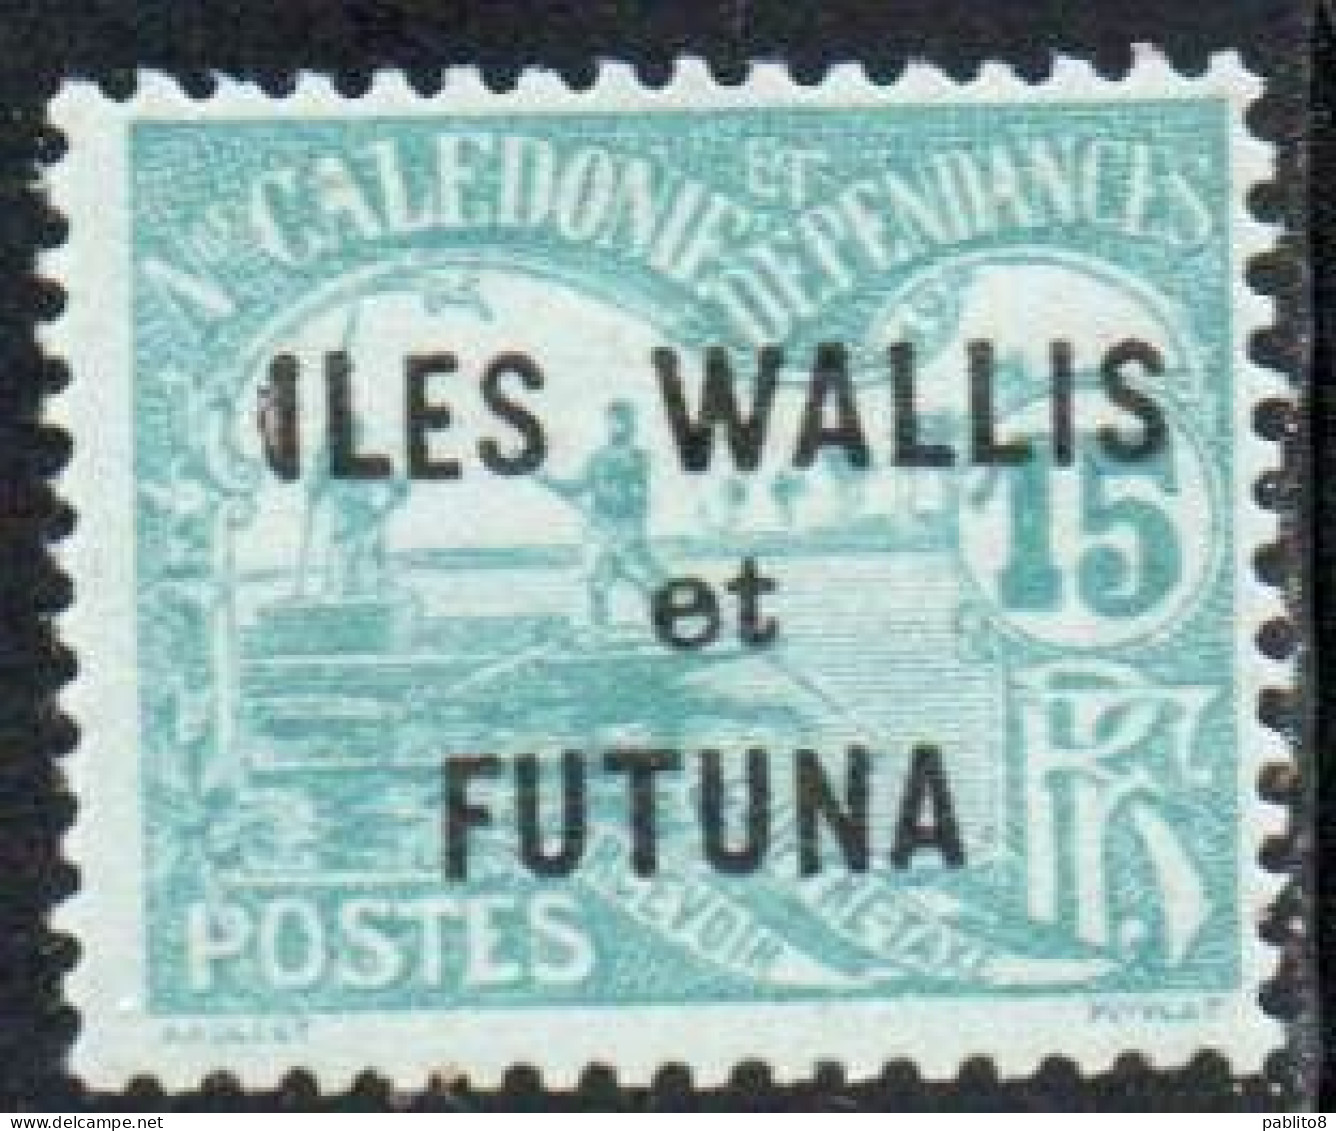 WALLIS AND FUTUNA ISLANDS 1920 POSTAGE DUE STAMPS TAXE SEGNATASSE MEN POLING BOAT NEW CALEDONIA OVERPRINTED 15c MNH - Timbres-taxe